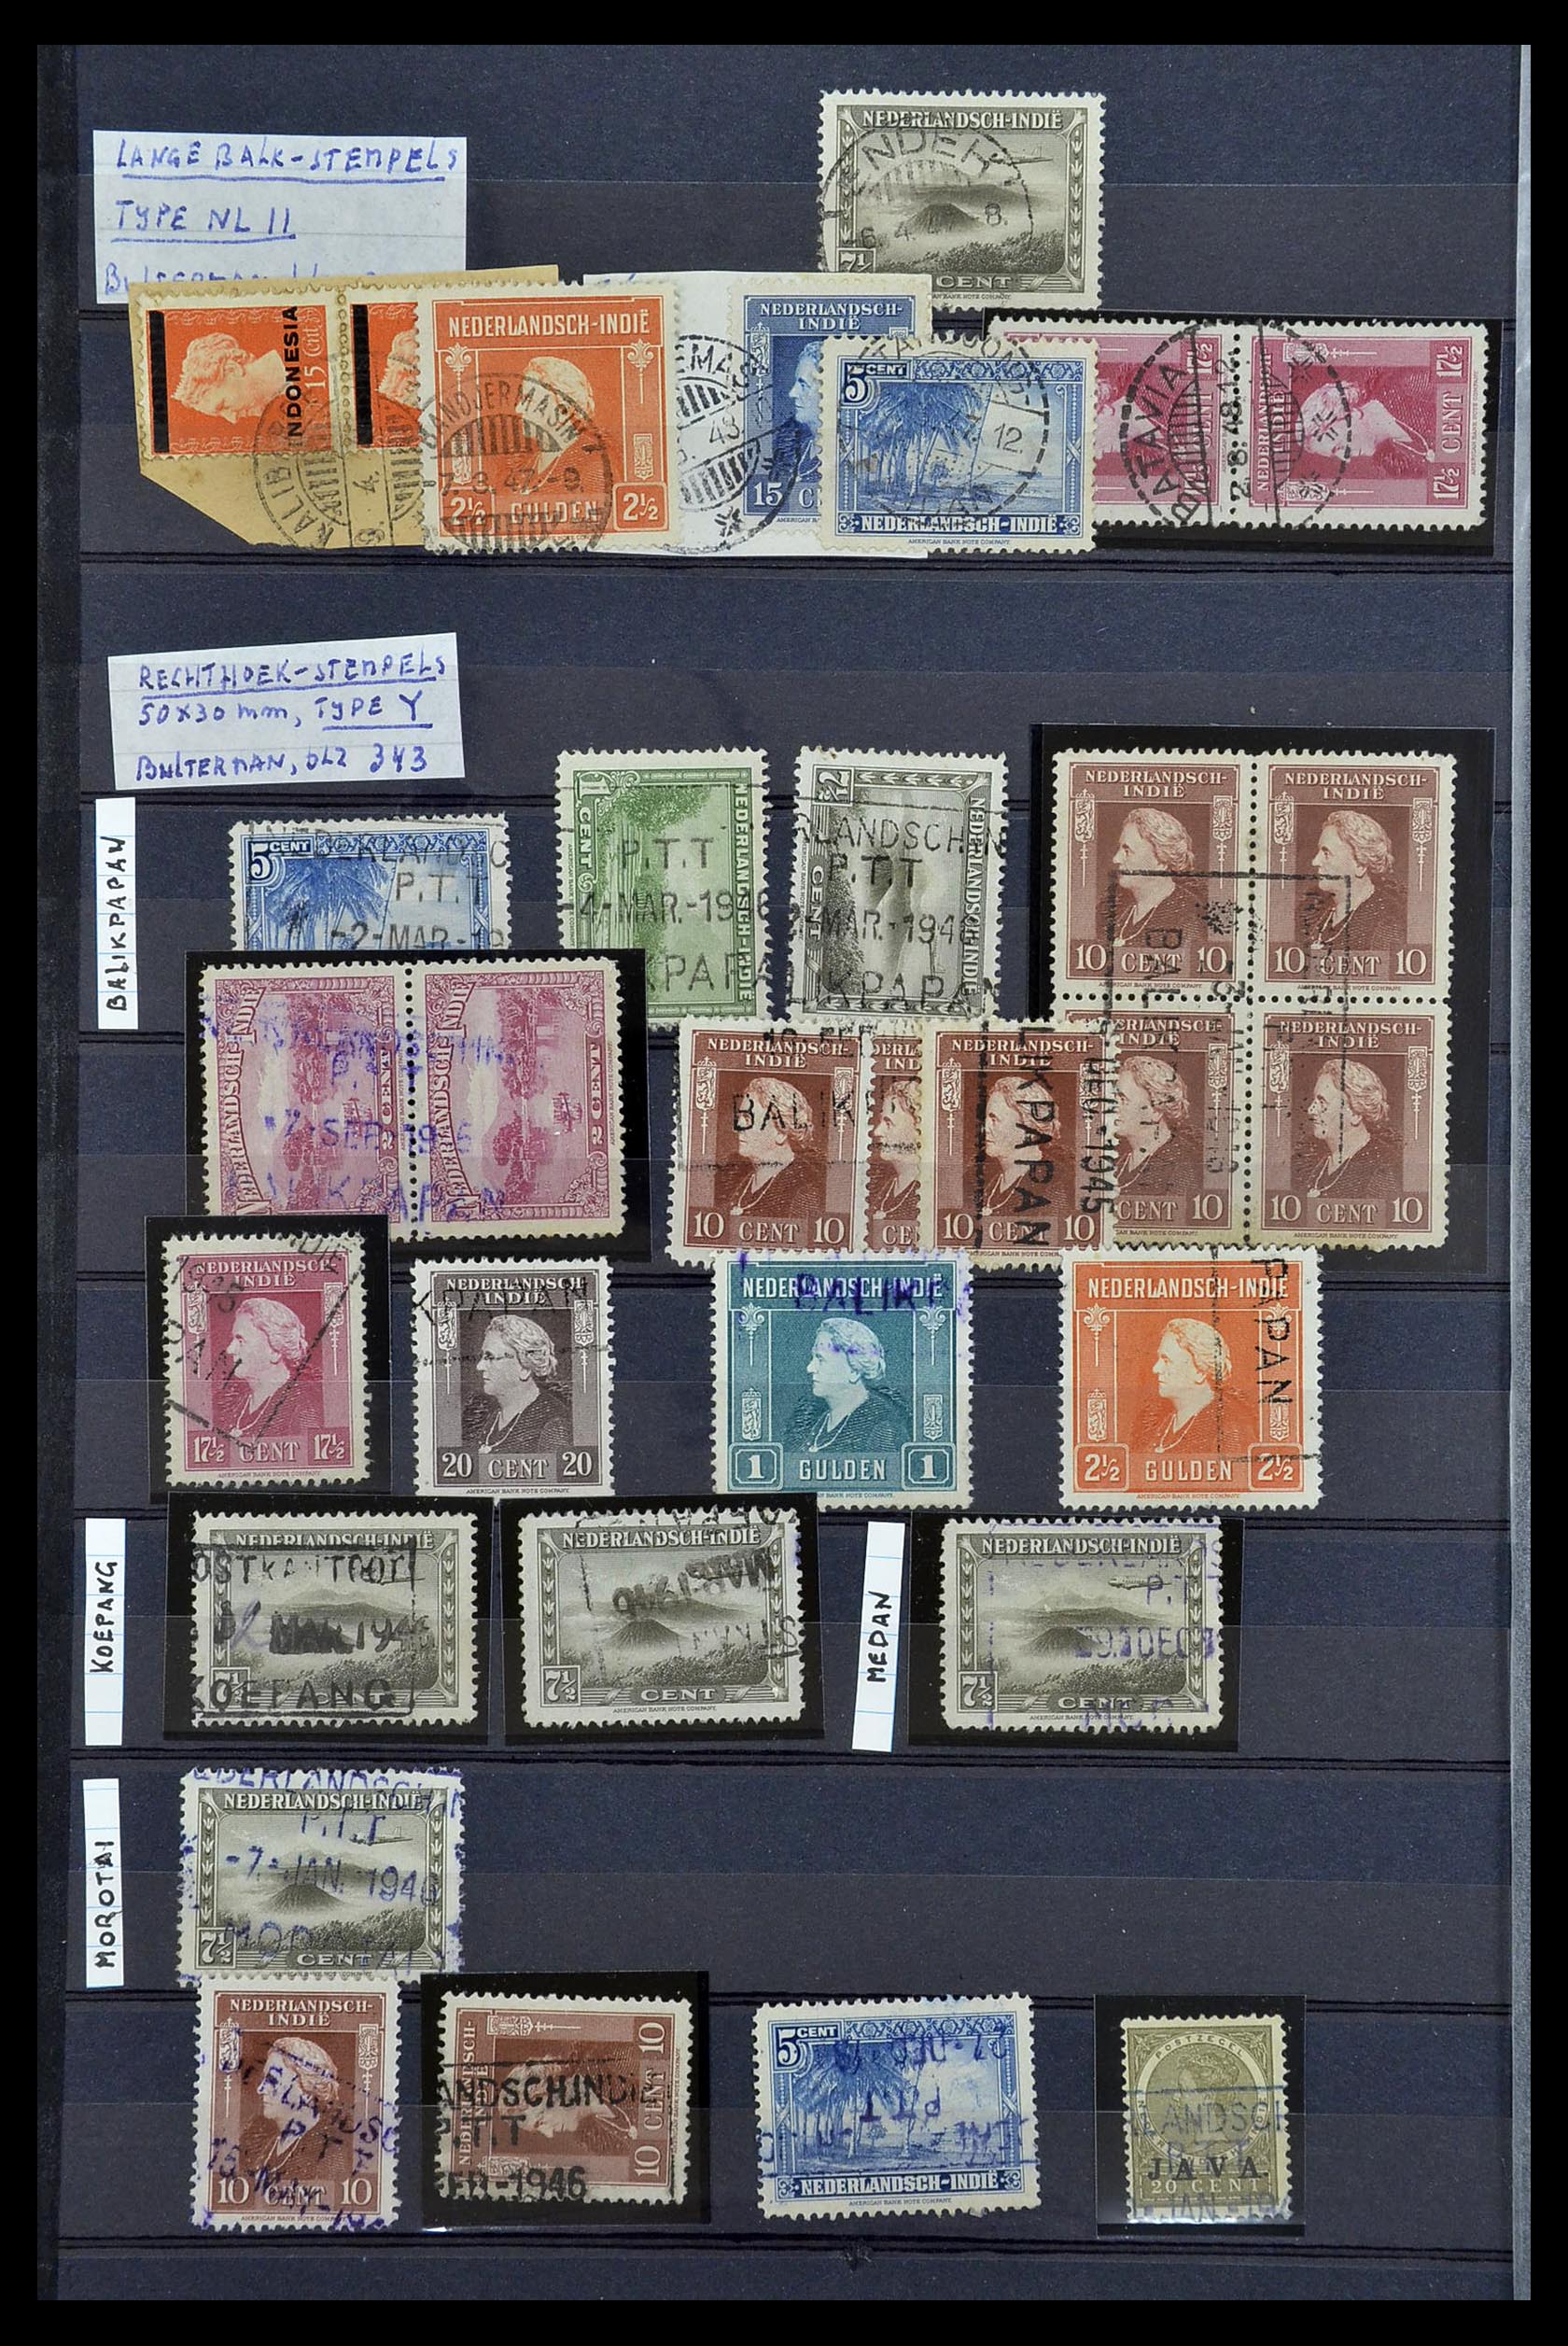 34690 032 - Stamp Collection 34690 Dutch east Indies cancels.